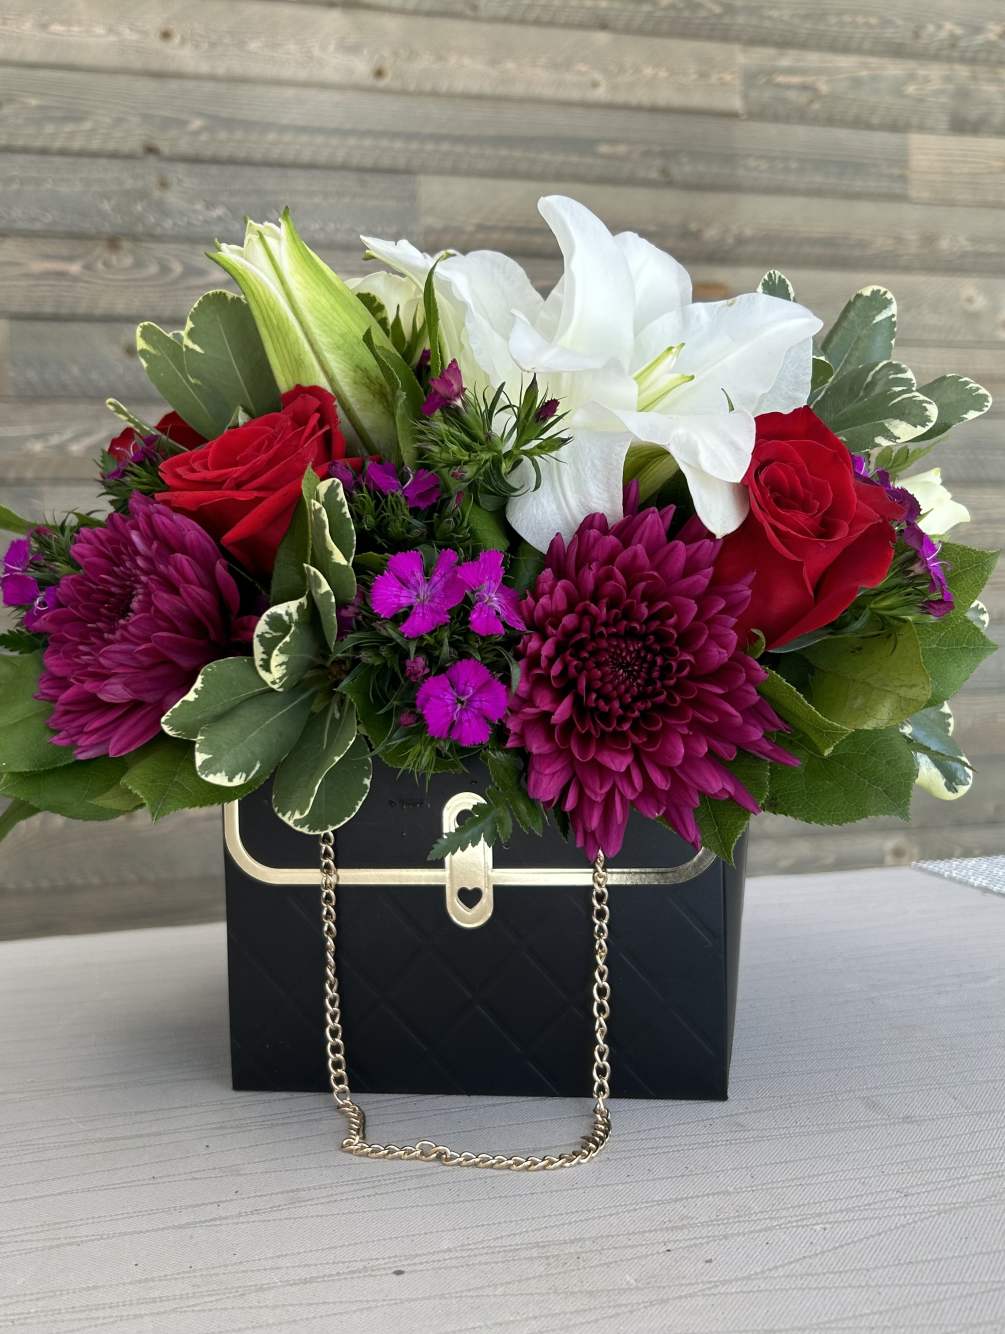 Imagine a floral arrangement inside a small gift purse with a variety